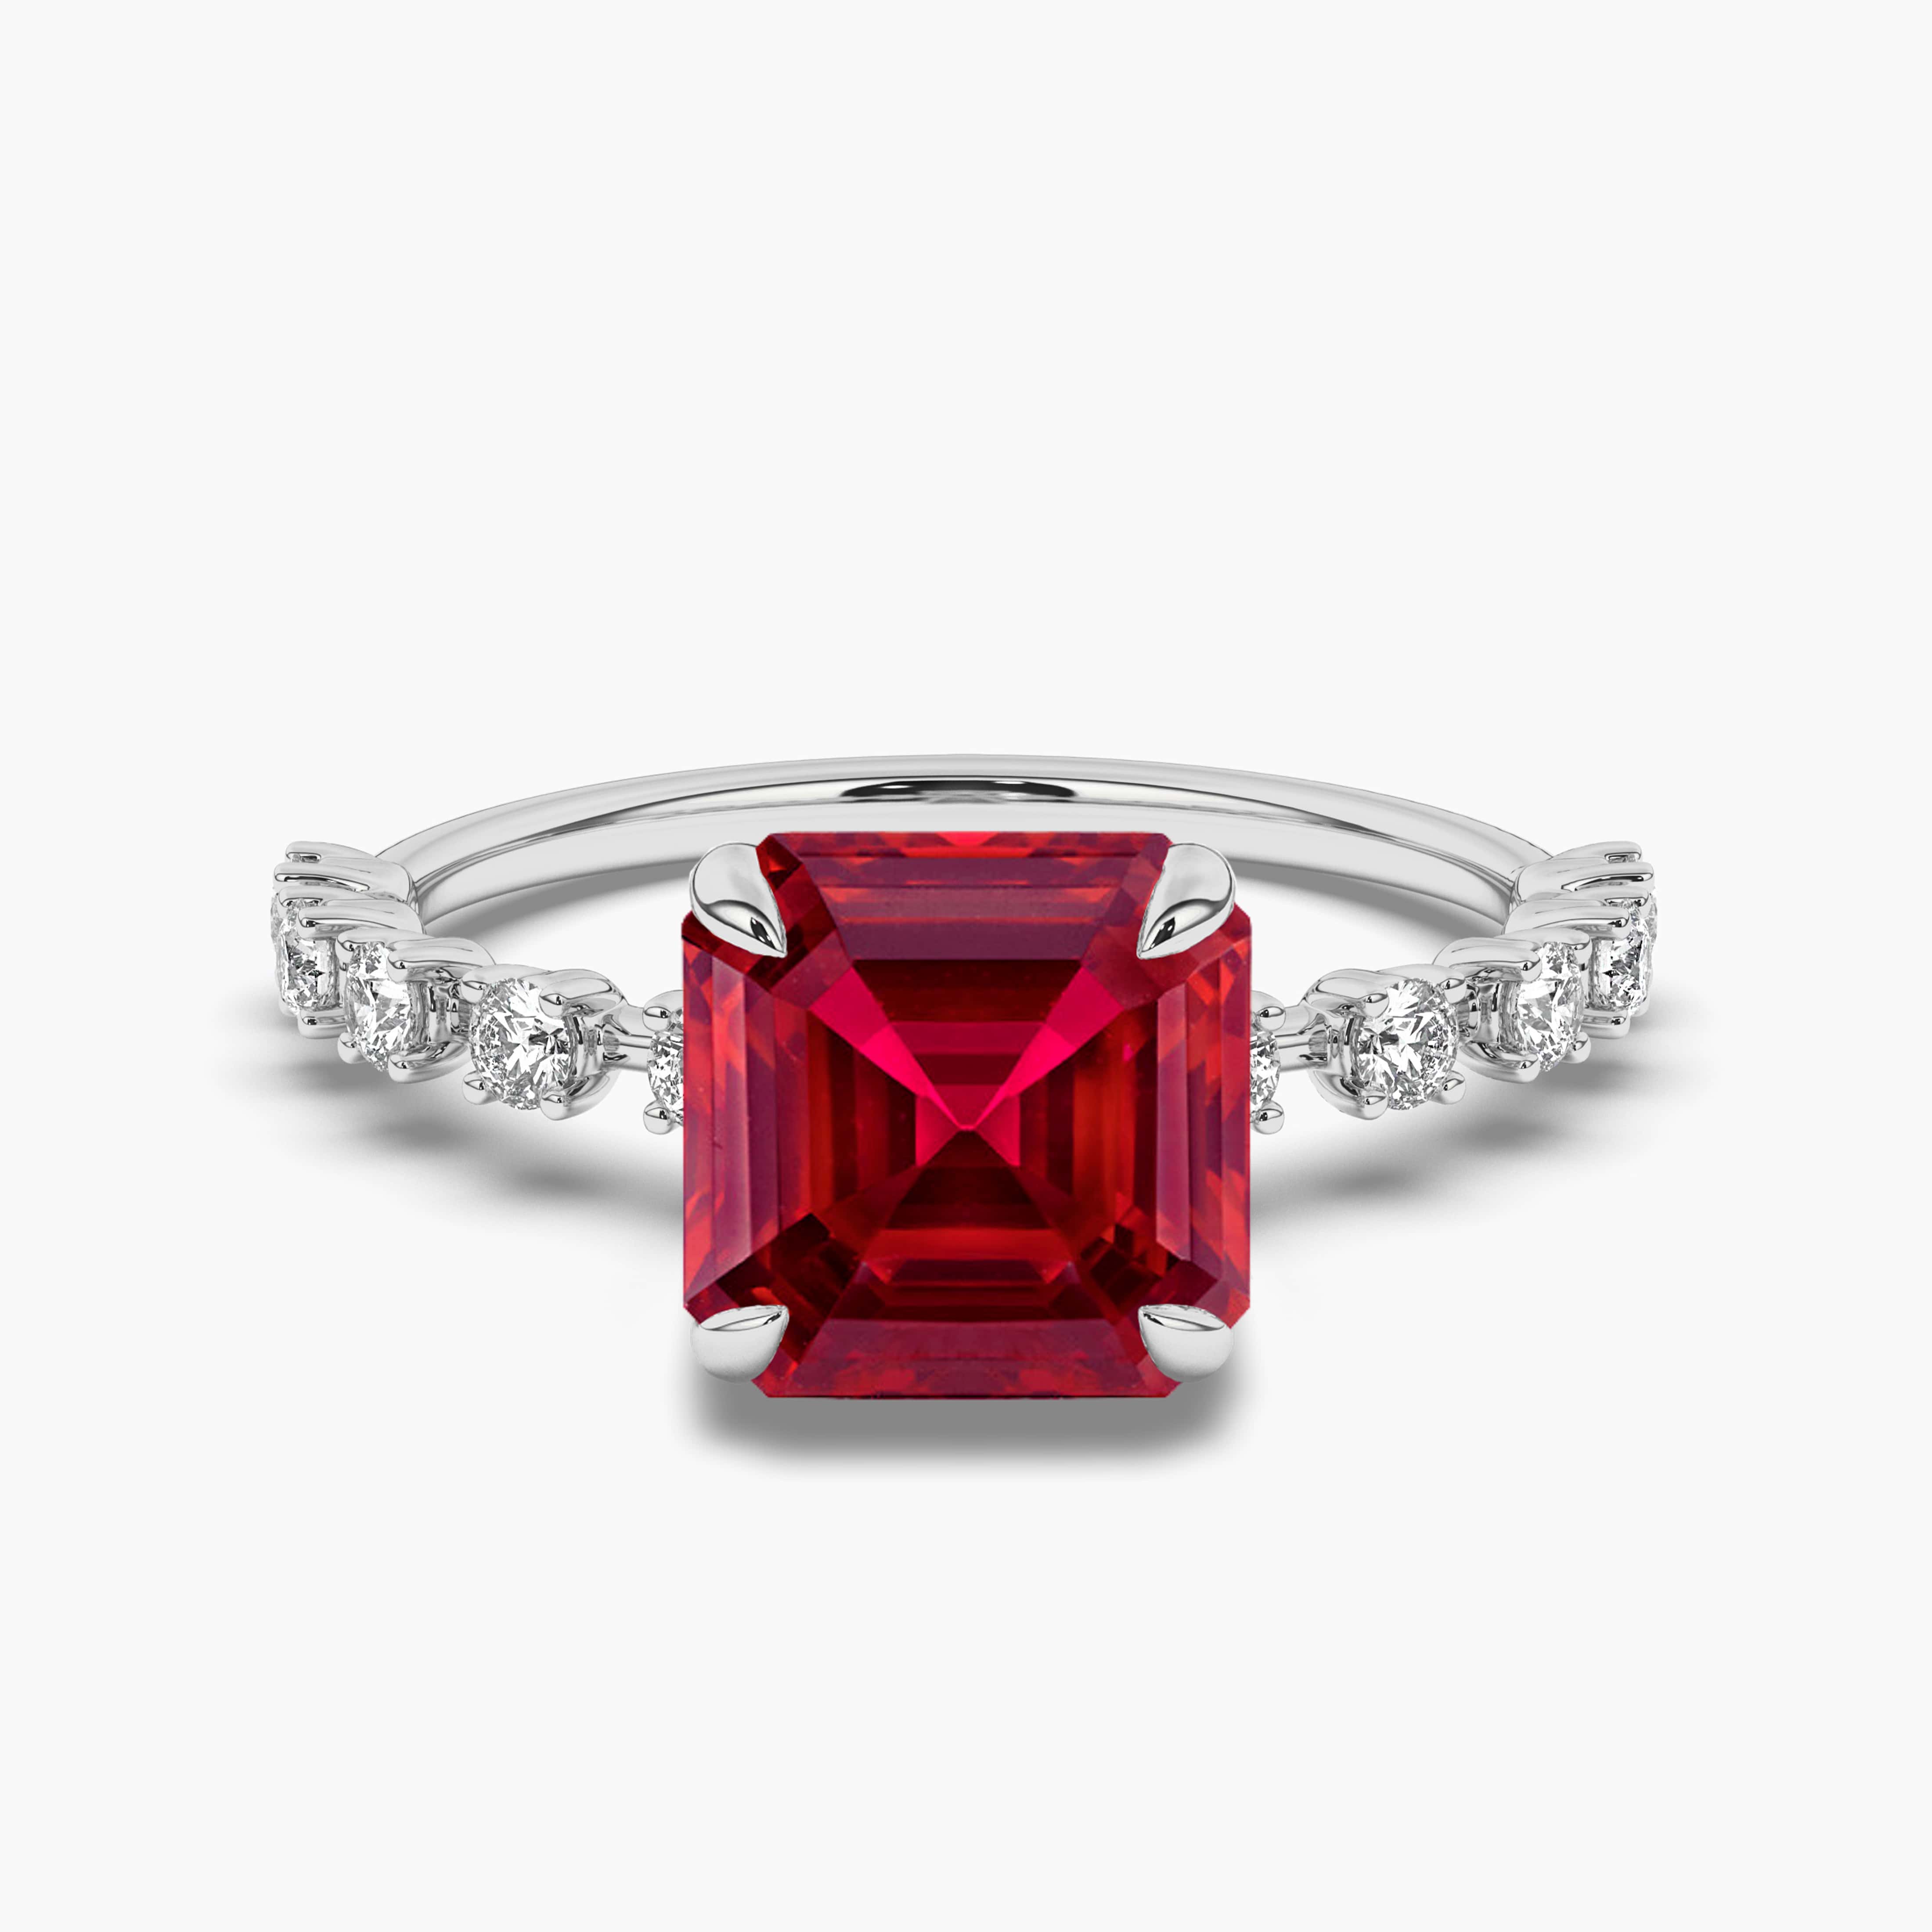 WHITE GOLD ASSCHER CUT RUBY AND DIAMOND ENGAGEMENT RING